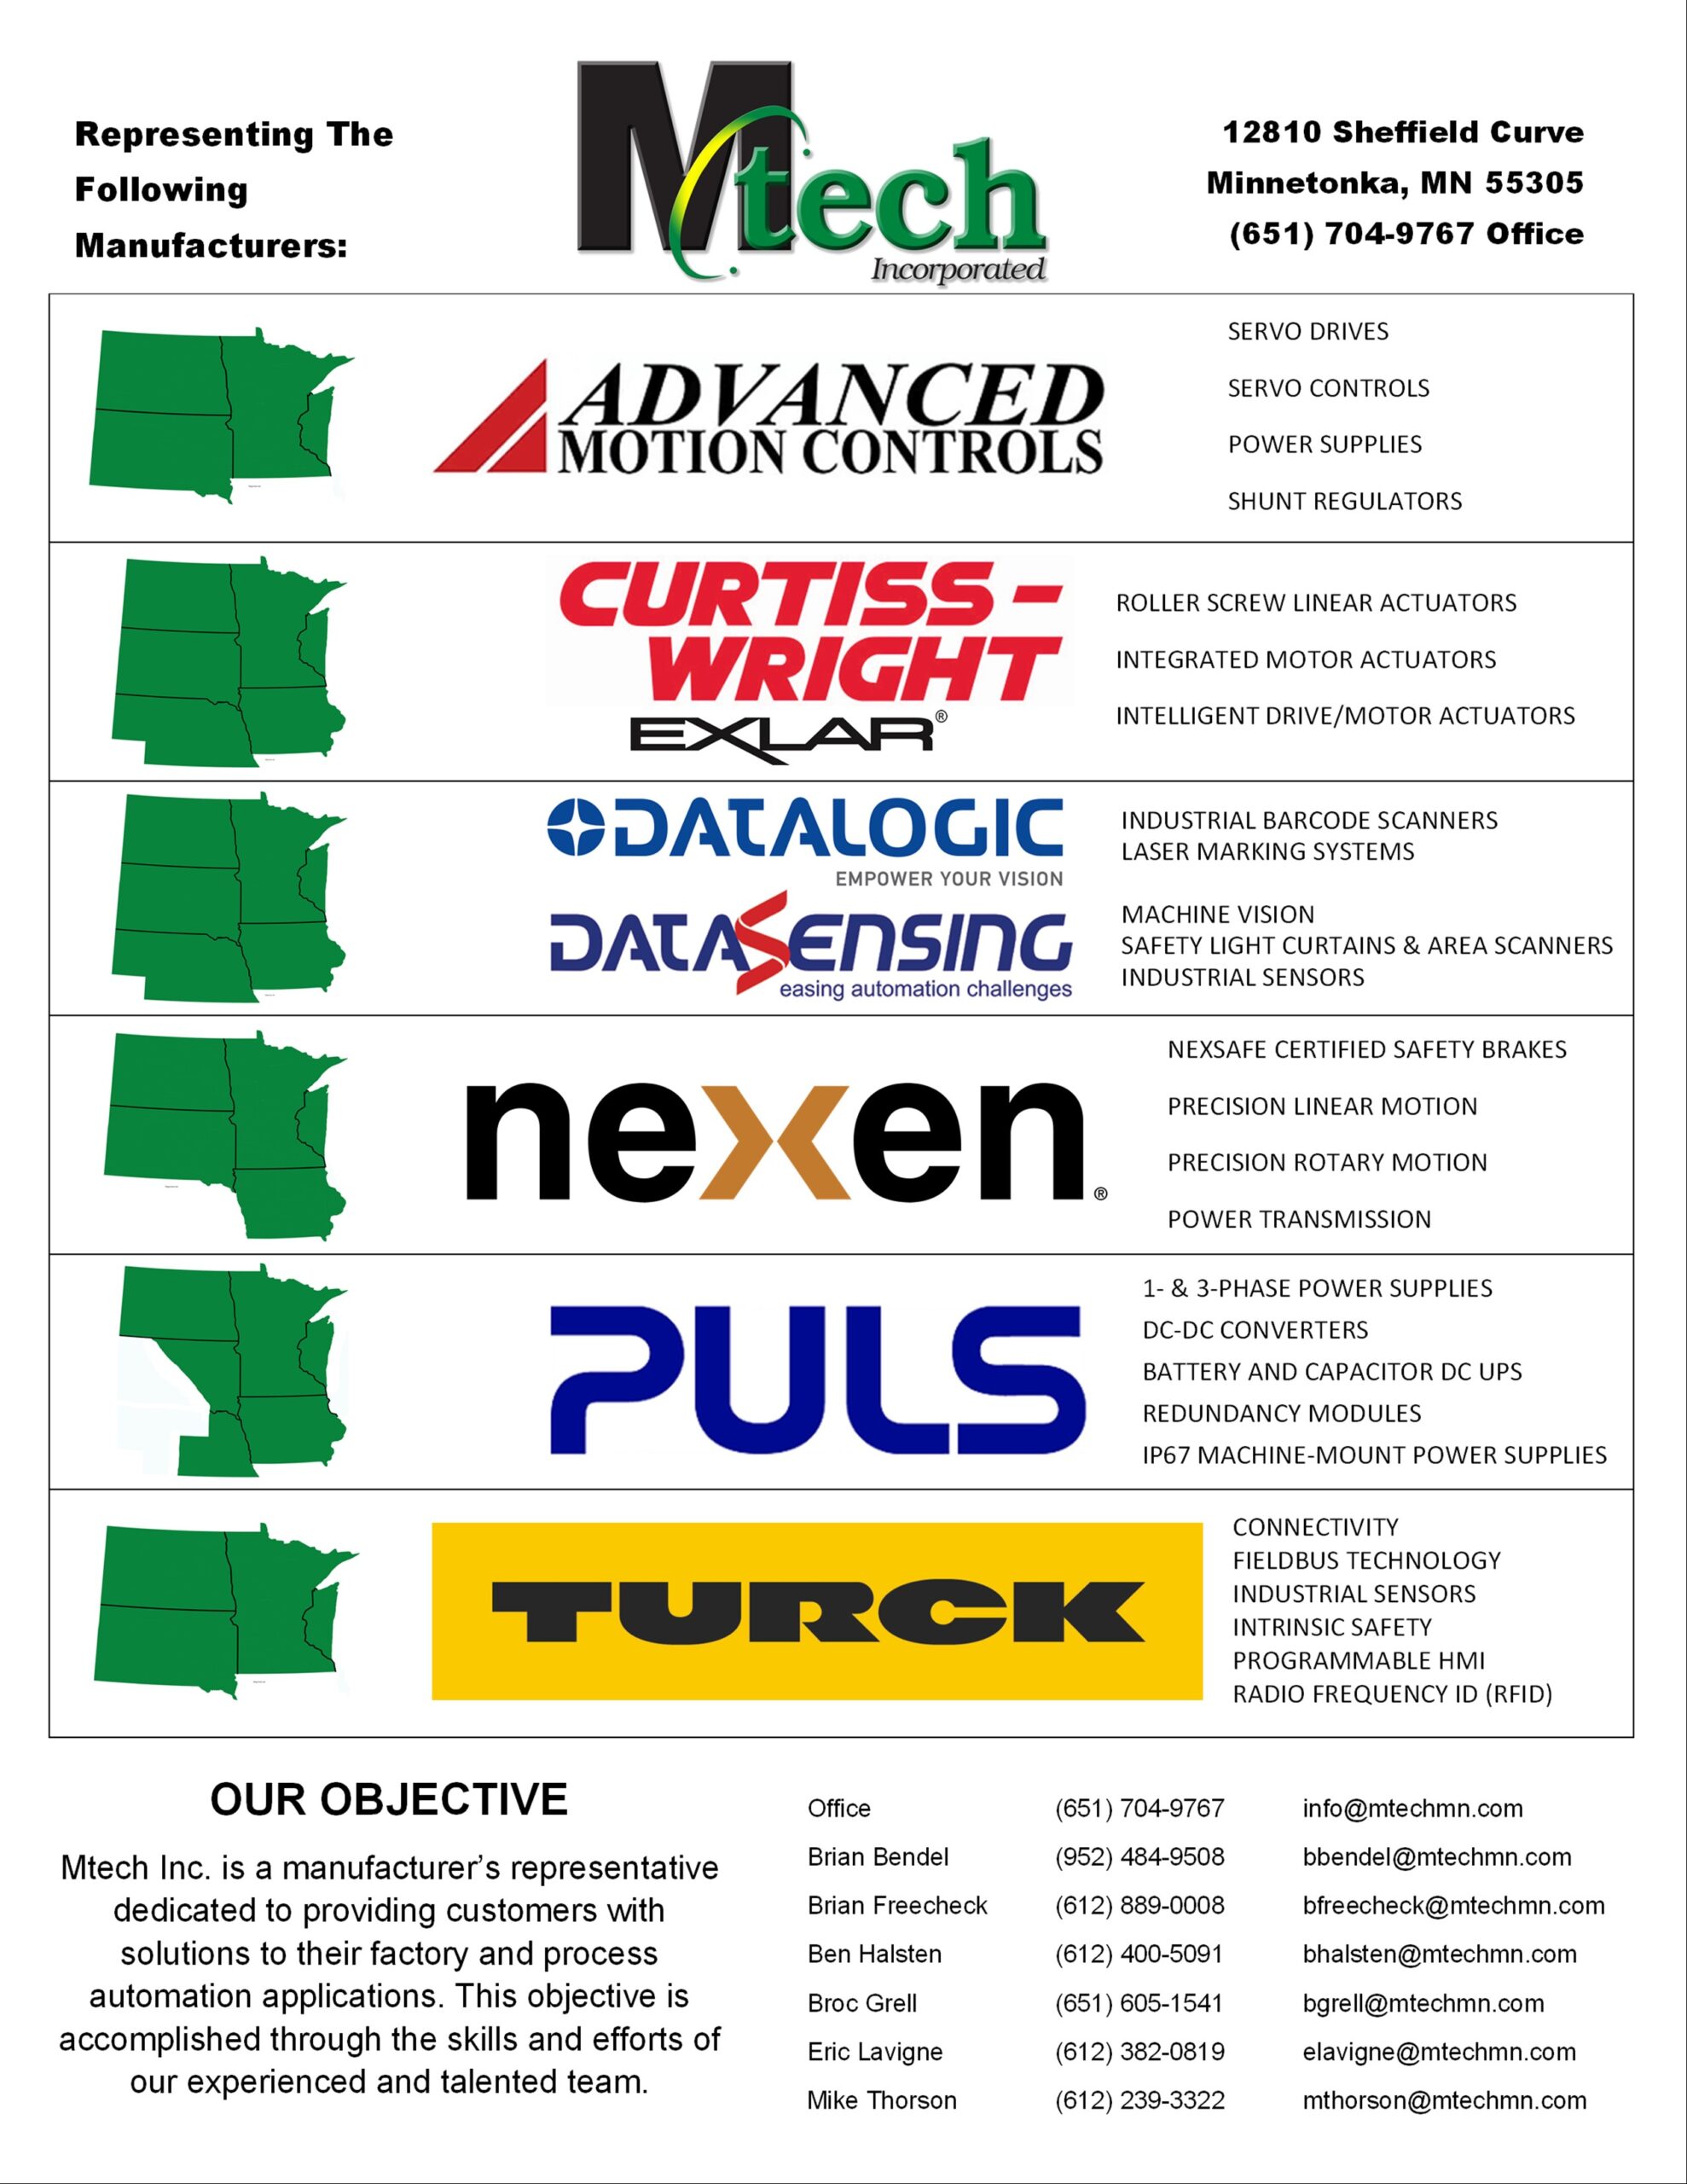 List of Manufacturers